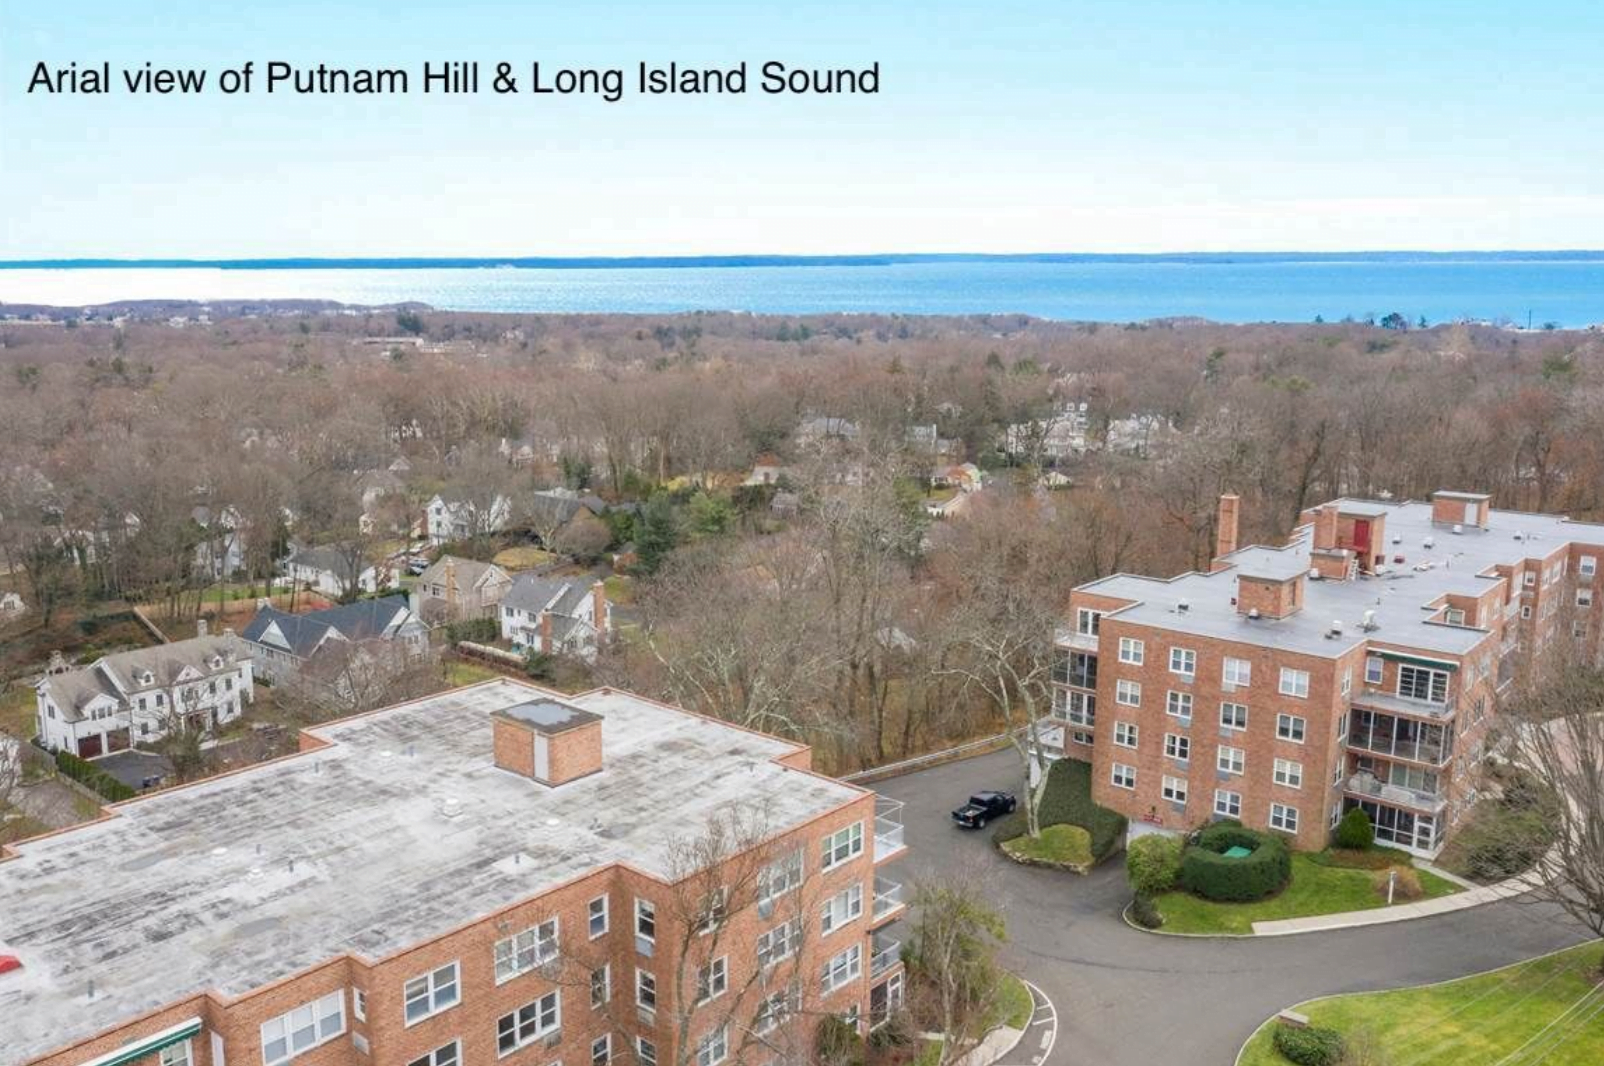 Putnam Hill is located just south of the intersection of Milbank Avenue and East Putnam Avenue, Greenwich, CT 06830